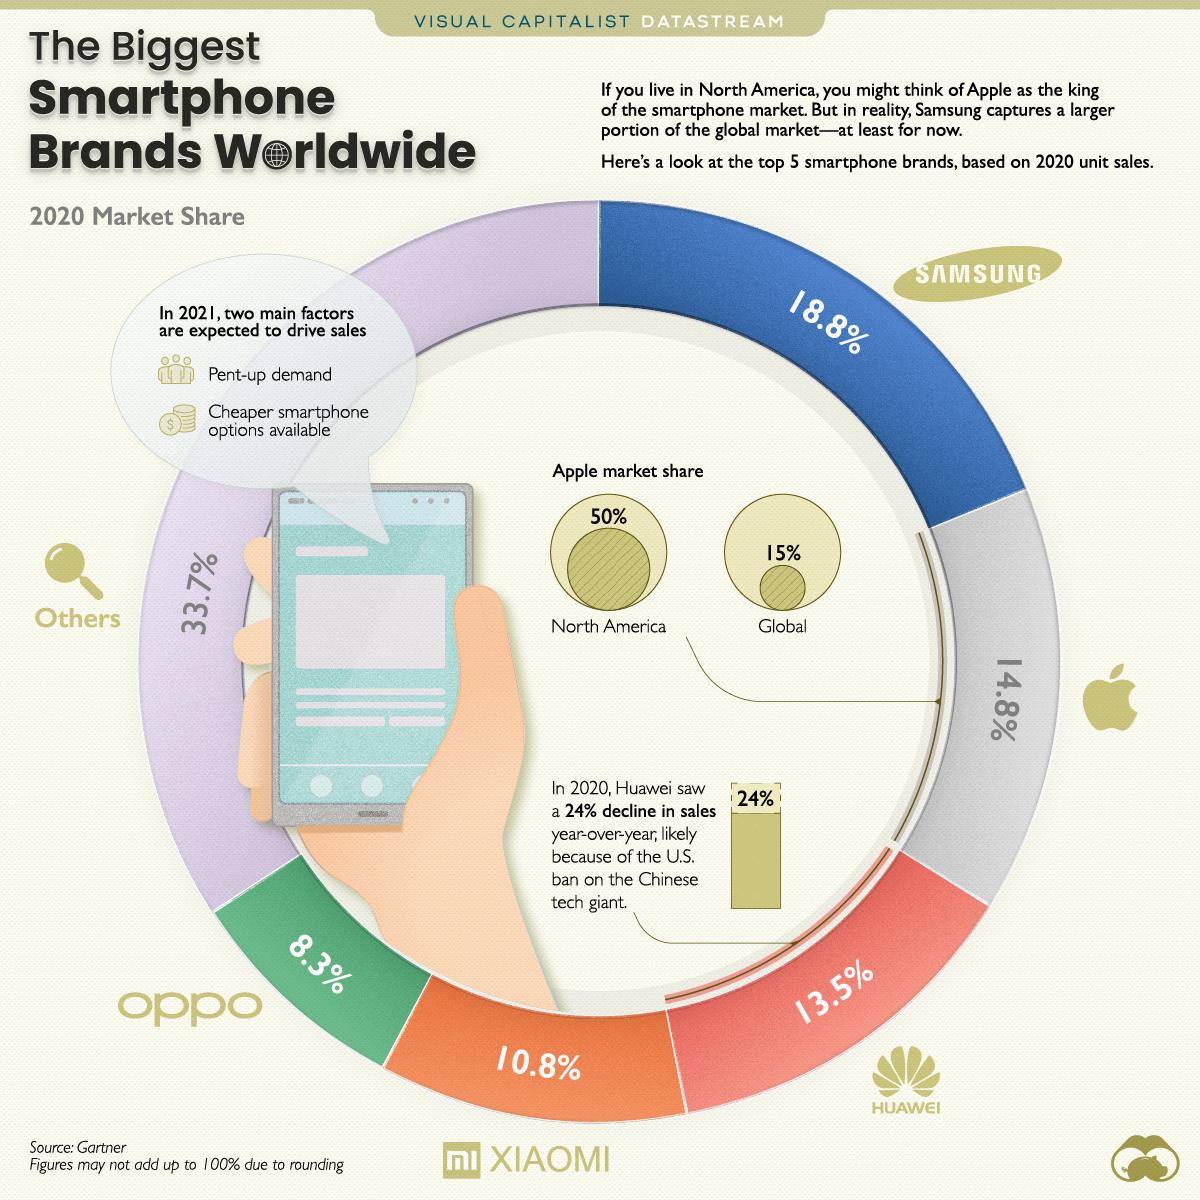 NAVWA: Smartphone brands and their global market share 2020